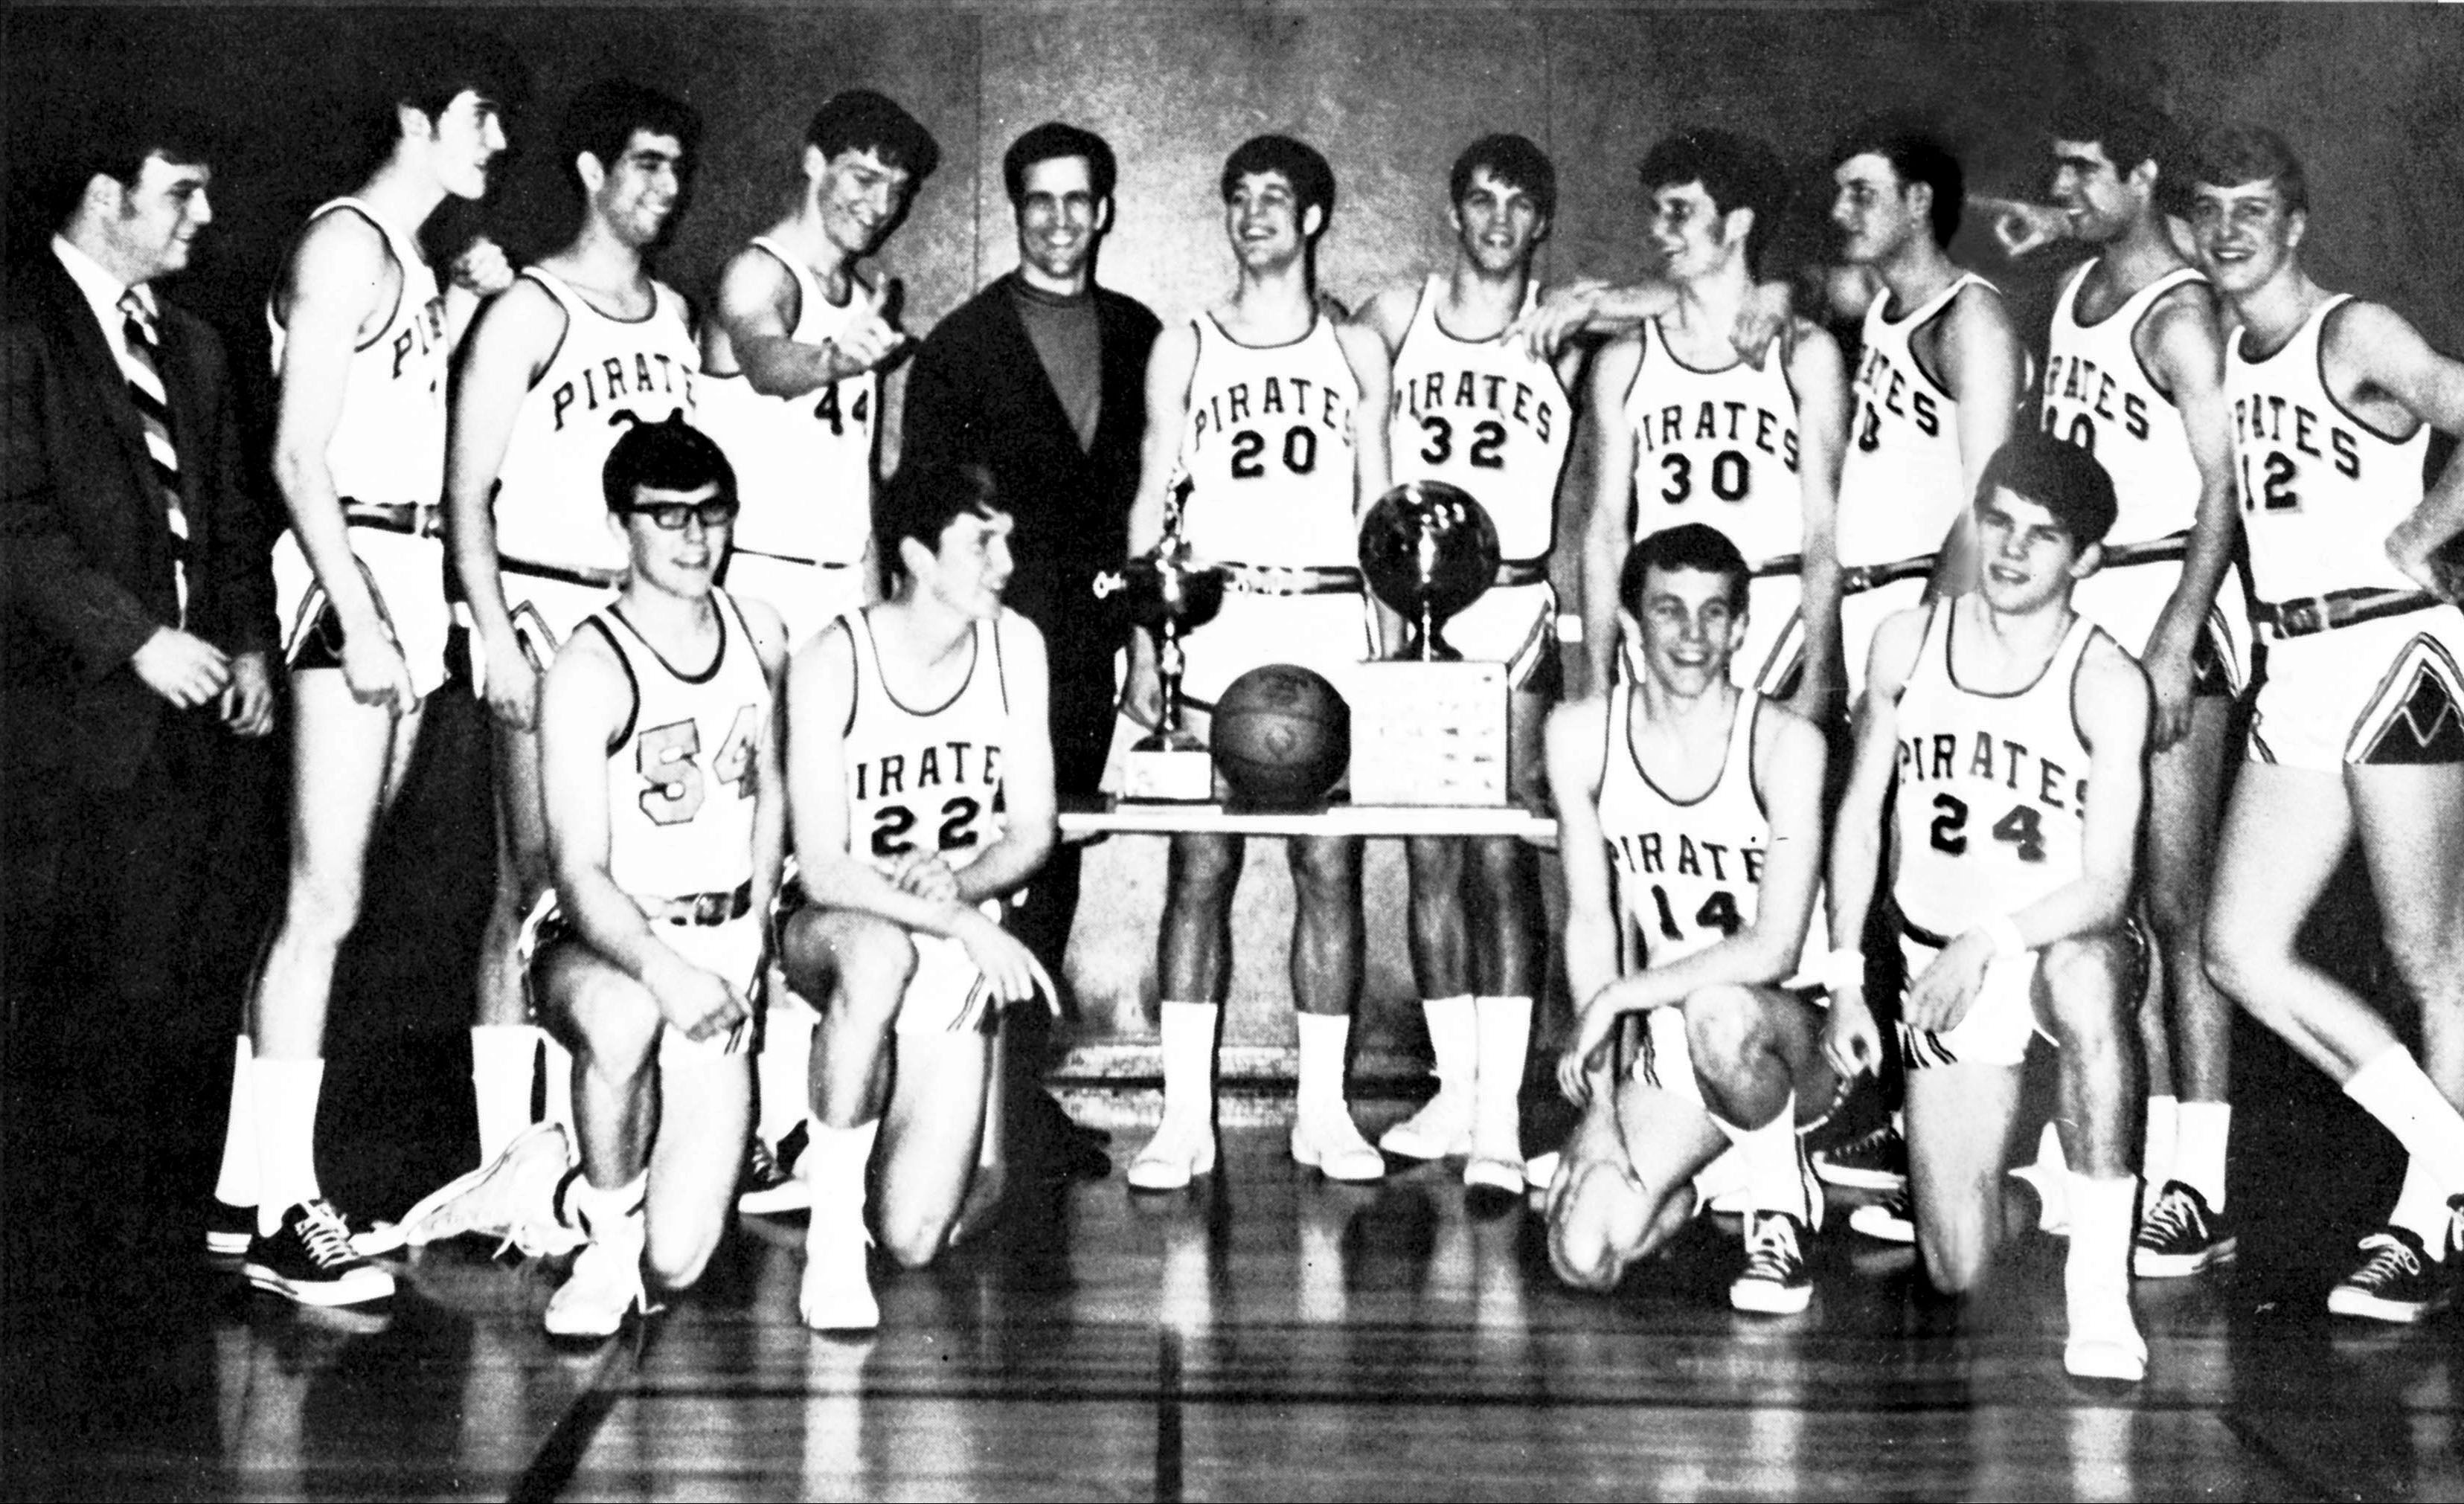 The 1970 Peninsula College men's basketball team will be among the first inductees into the newly formed Peninsula College Athletics Hall of Fame. The 1970 team